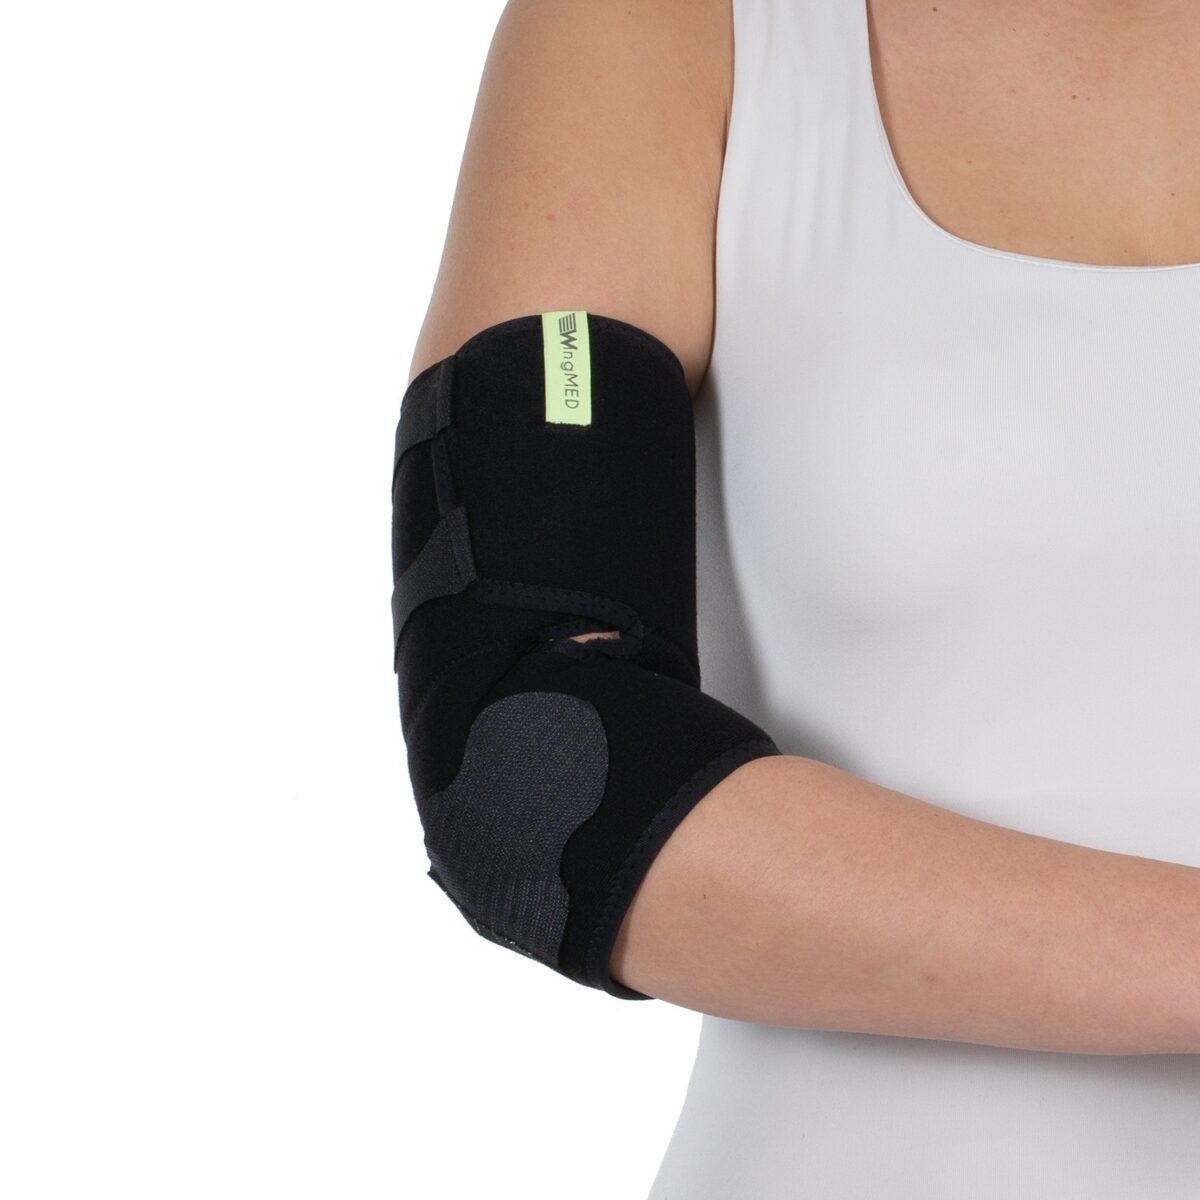 wingmed orthopedic equipments W203 W205 tennis elbow support 1